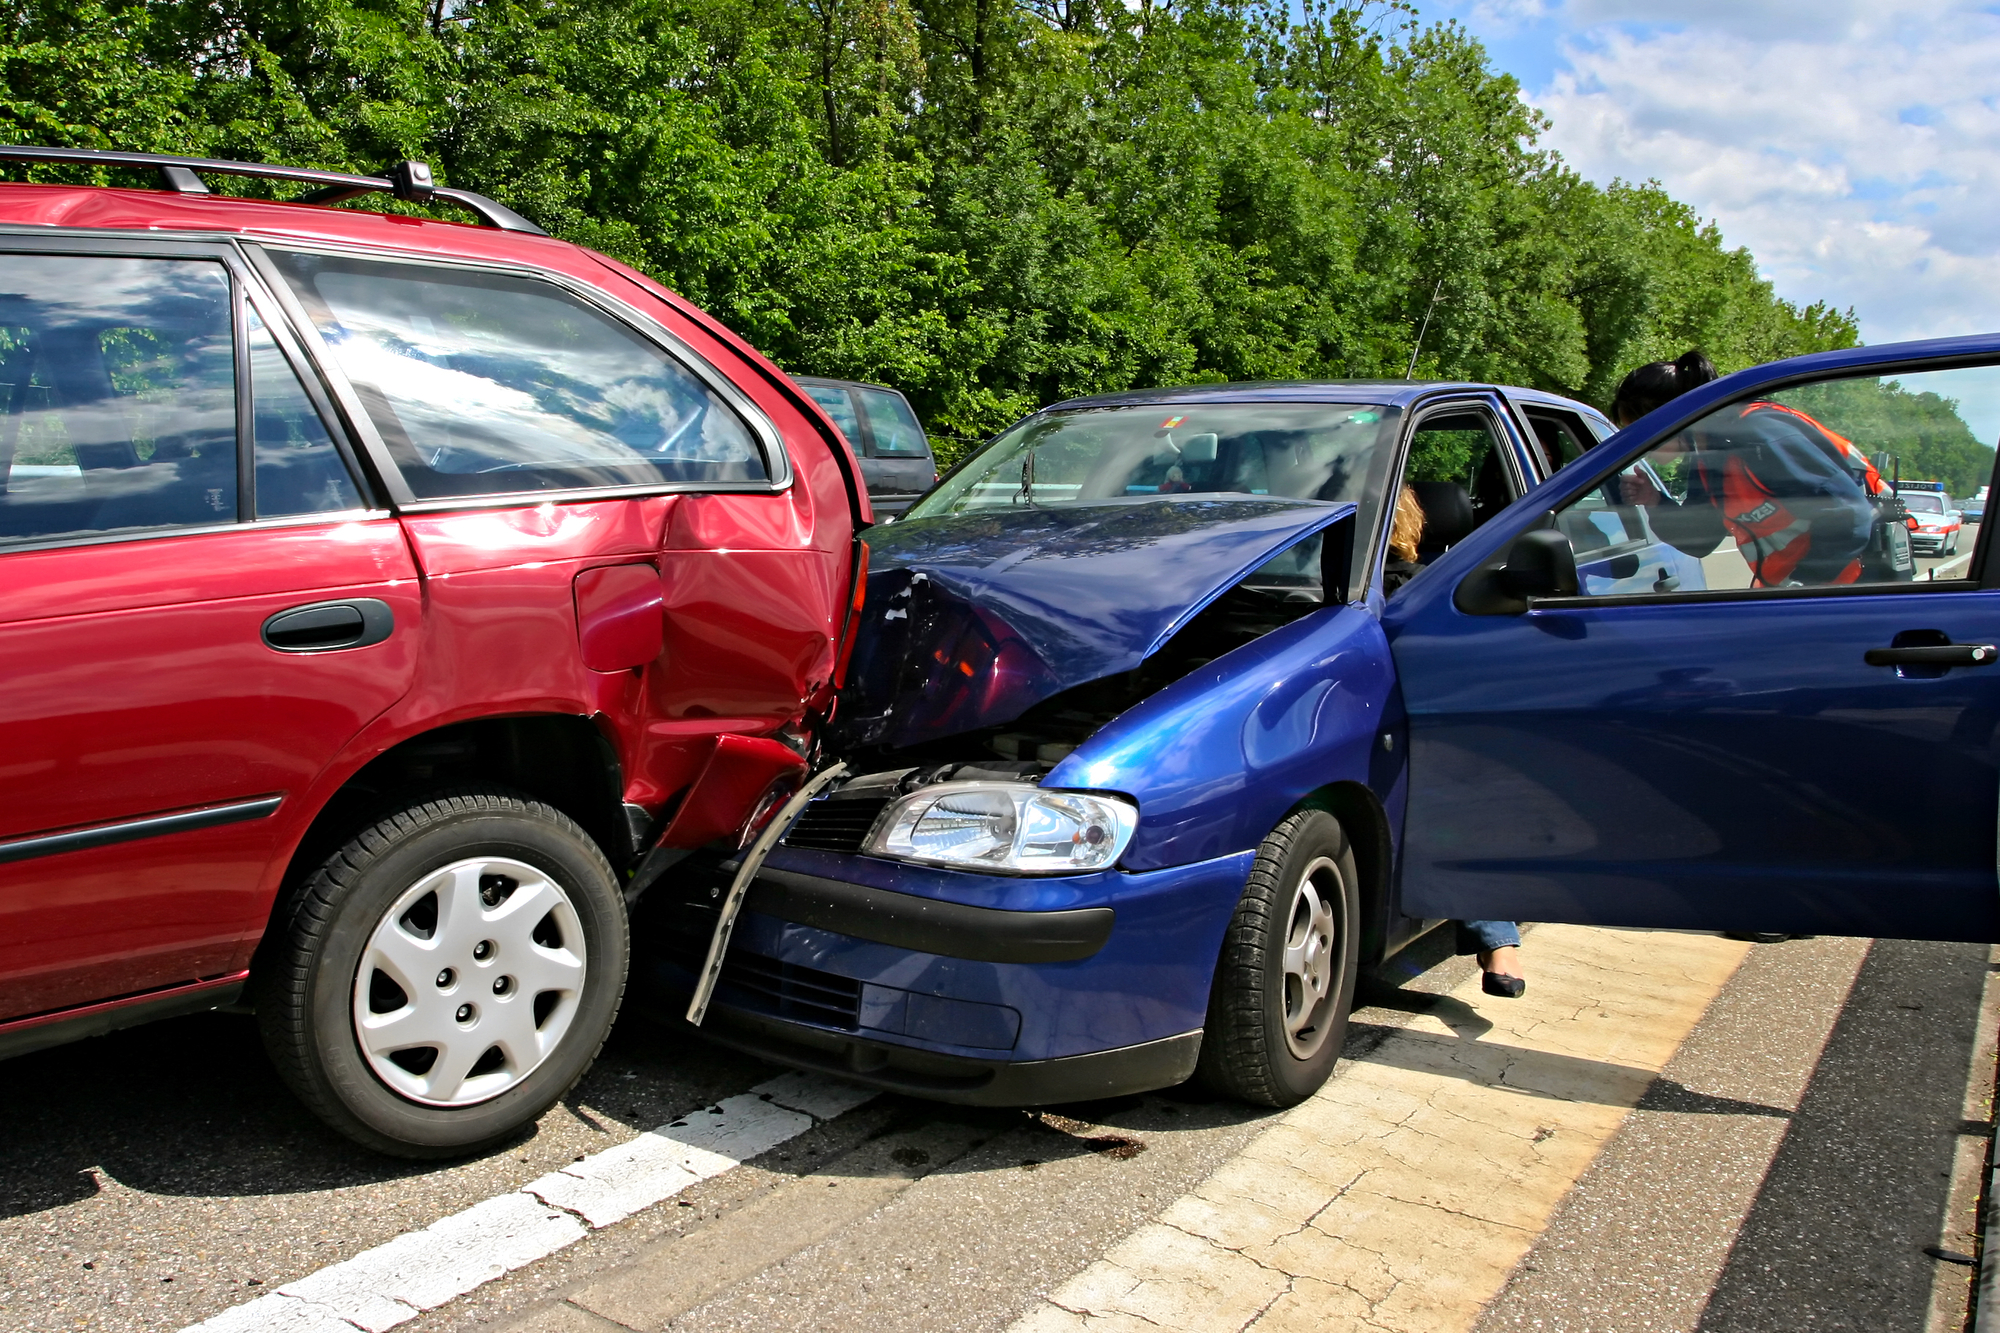 What's the most common type of motor vehicle accident in Santa Ana?